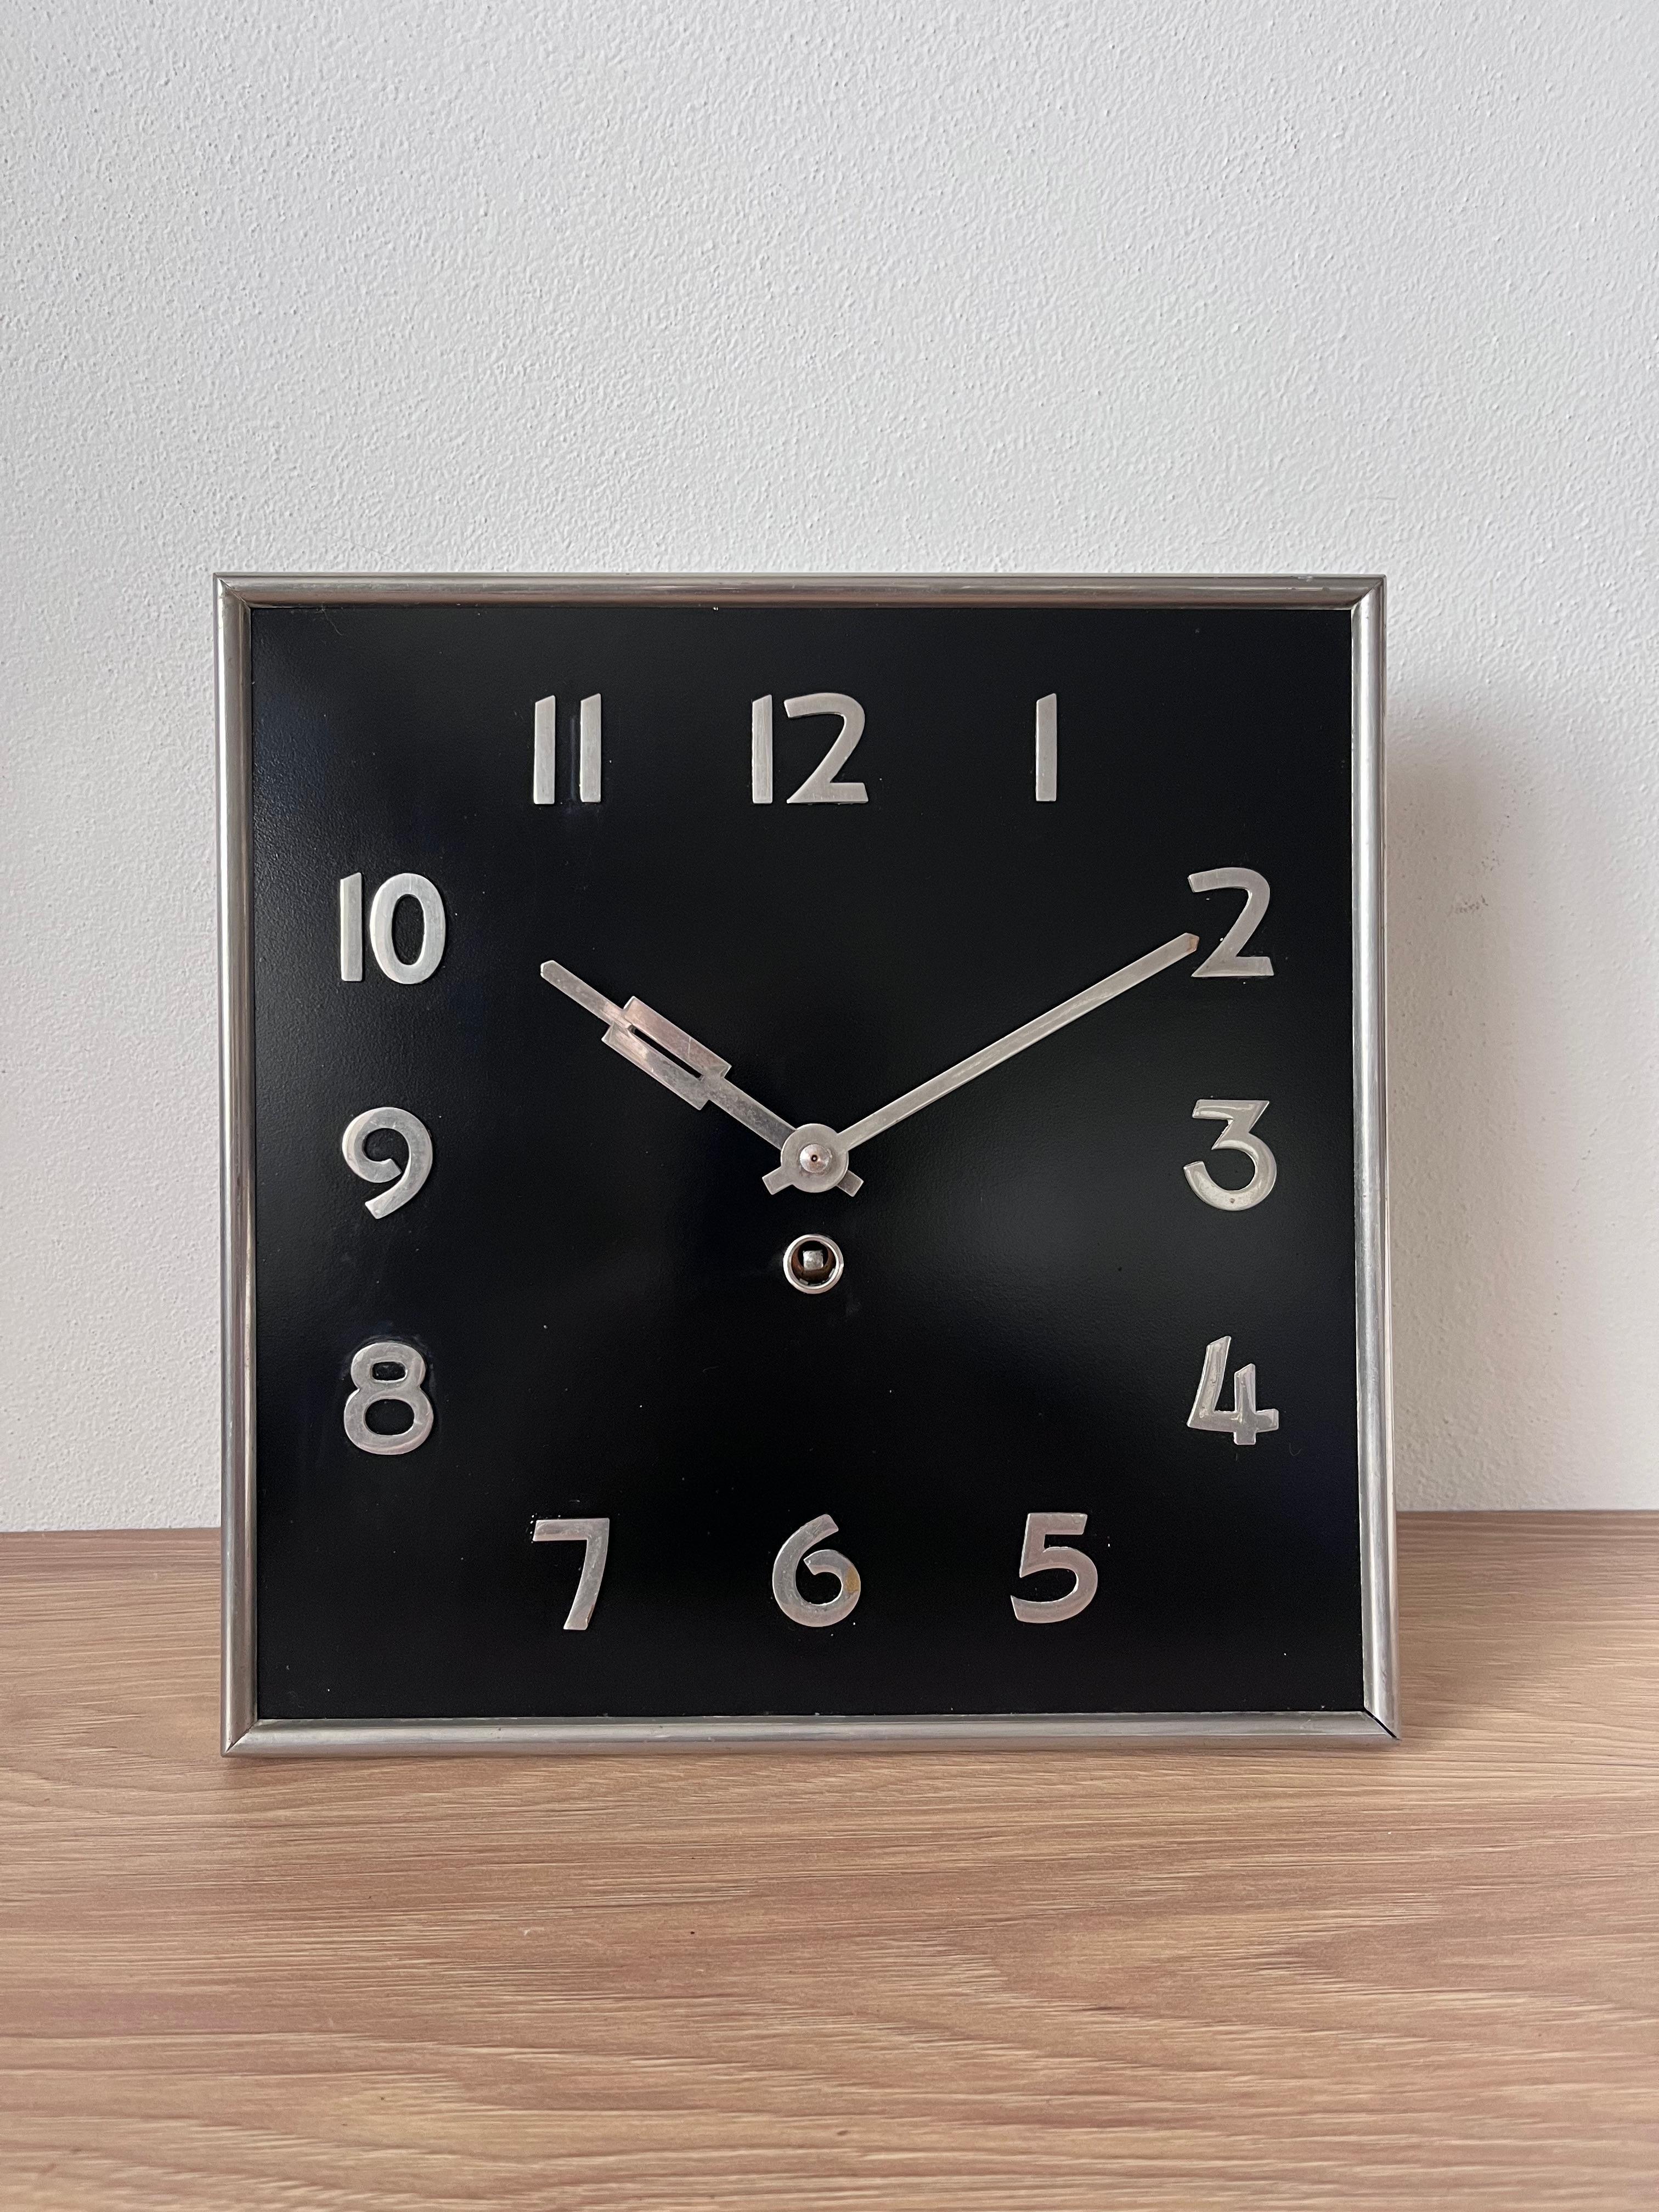 - German wall clock 
- the clock is in good condition
- the front dial has been restored
- the chimes have been completely cleaned and oiled.
- The clock is mechanical and is wound with a key.
- The case is made of metal and wood